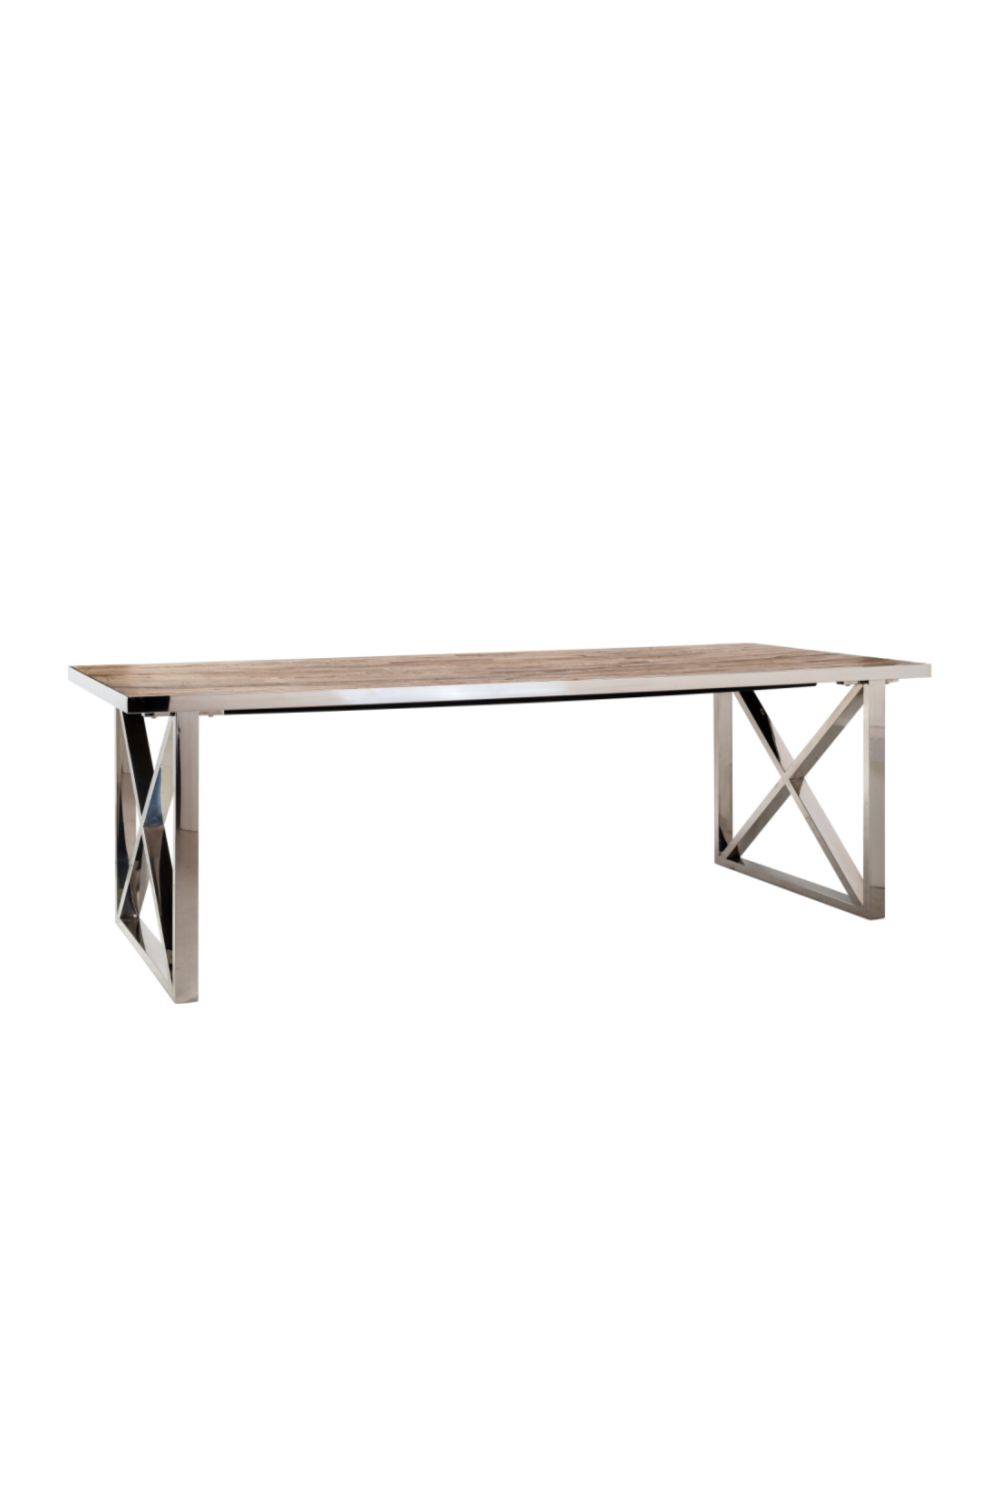 Recycled Elm Silver Dining Table M | OROA Redmond | OROA.com